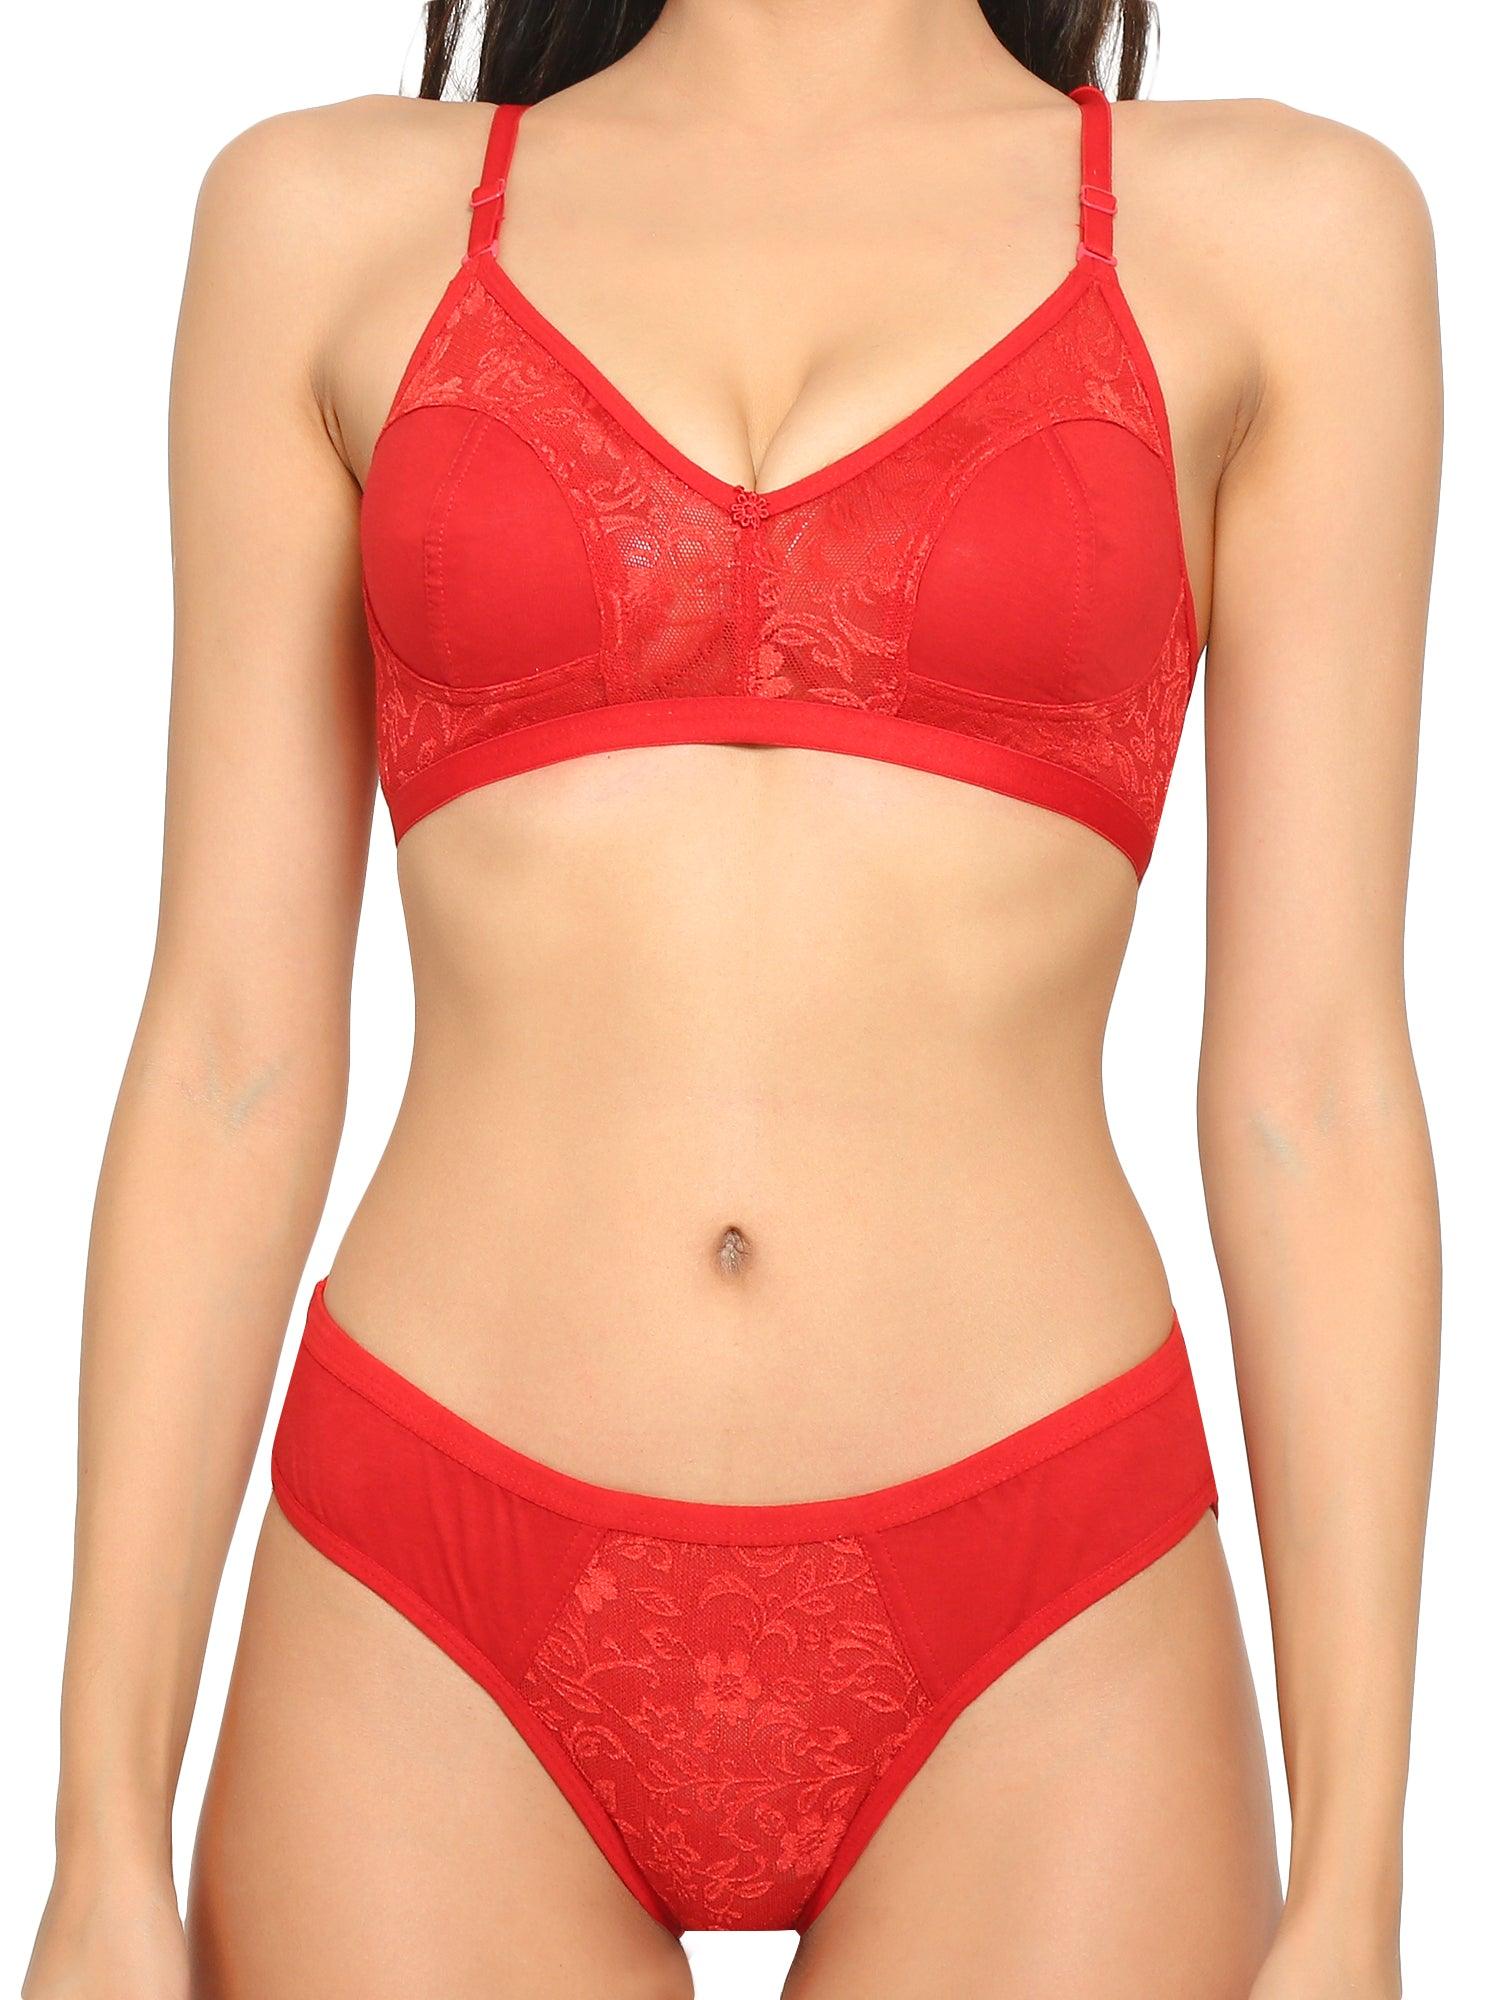 red bras and panty set